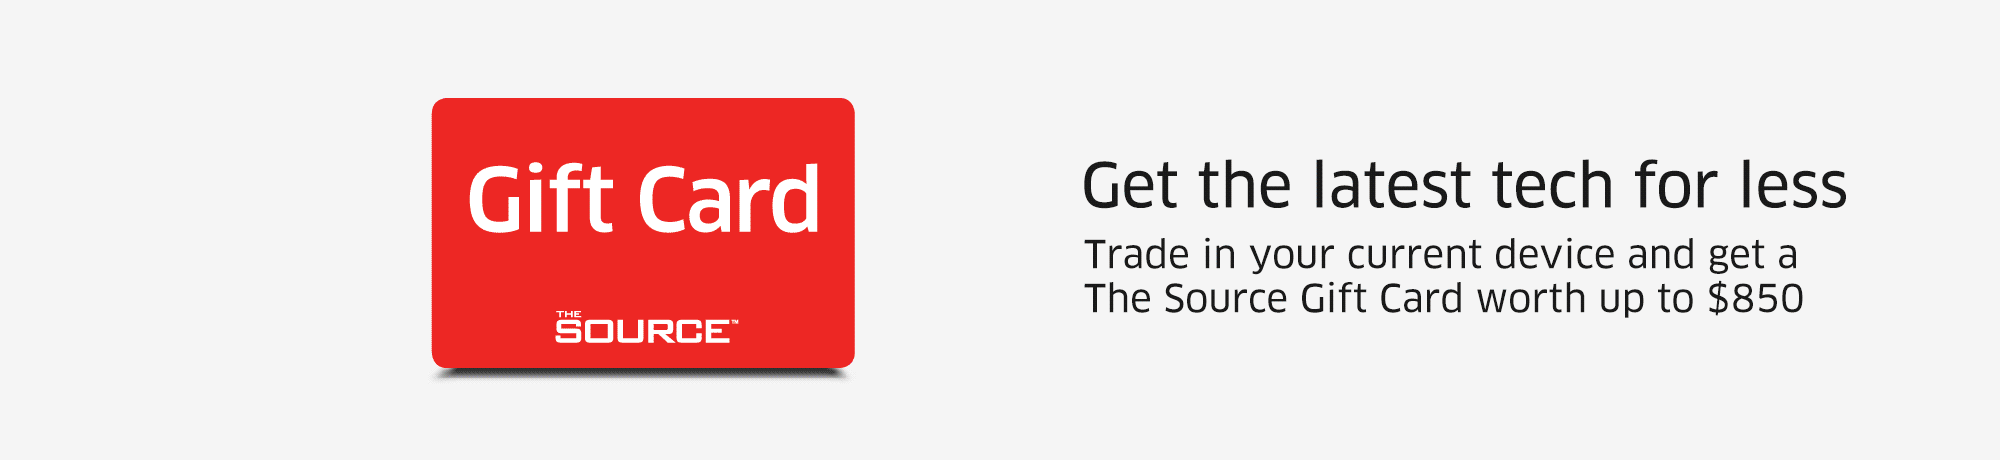 Get the latest tech for less  Trade in your current device and get a The Source Gift Card worth up to $850